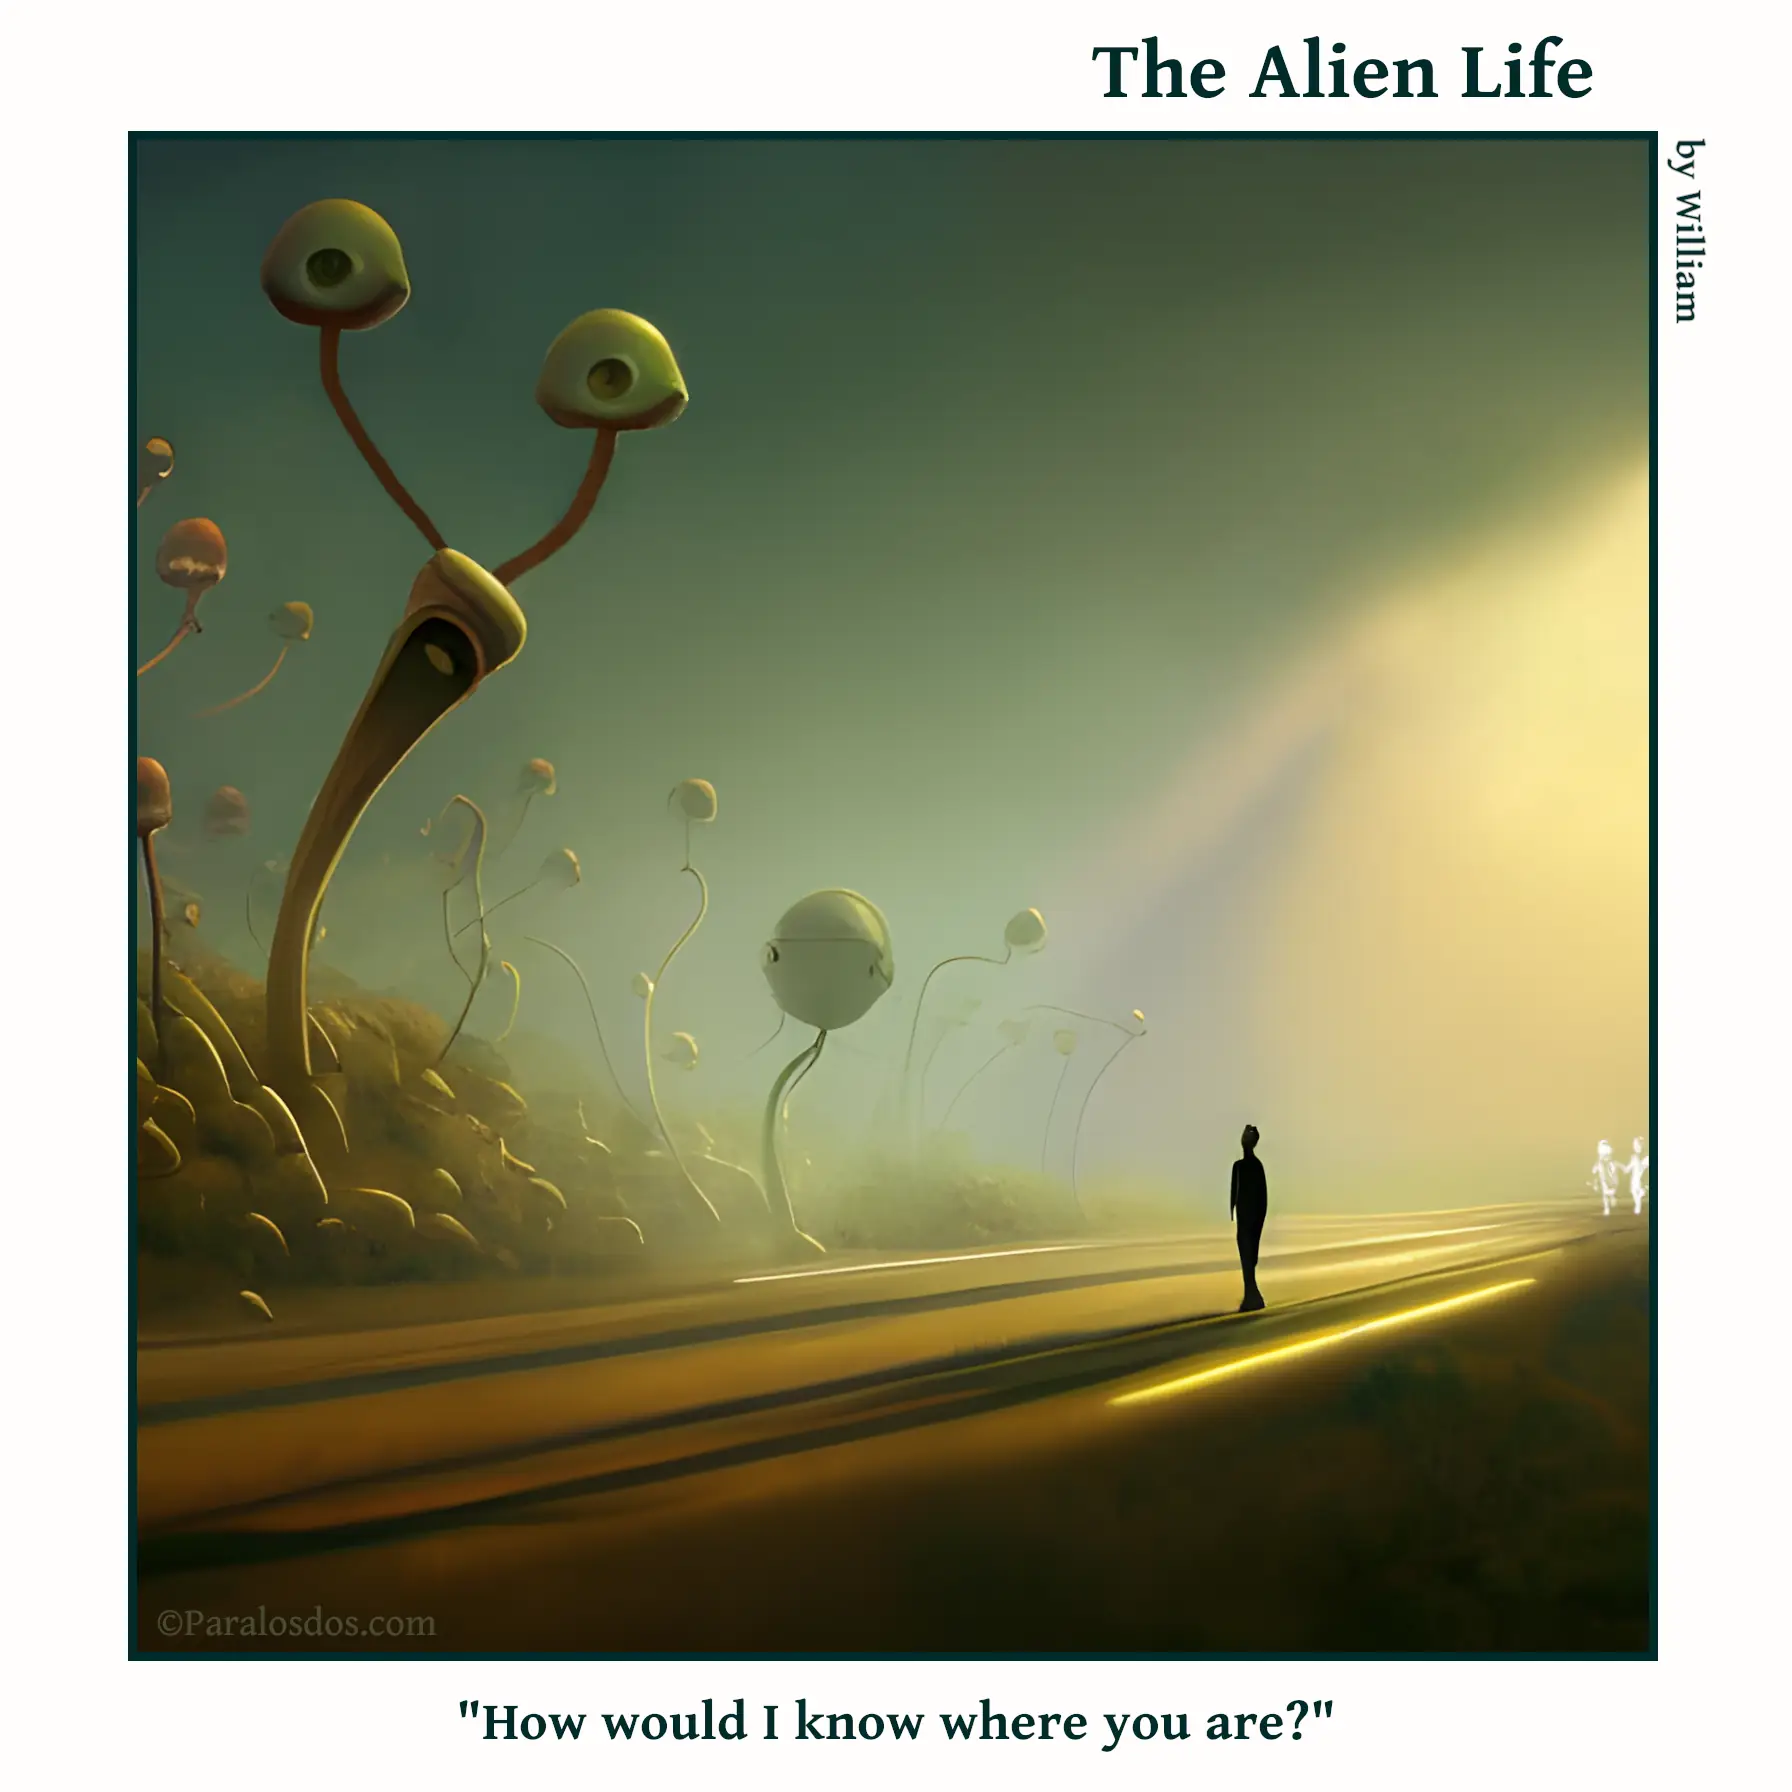 The Alien Life, one panel Comic. A small human figure is on a road looking up at a giant alien figure shaped like a stalk with eyes attached to the top of tendrils coming out of the top of it's body. The caption reads: "How would I know where you are?"